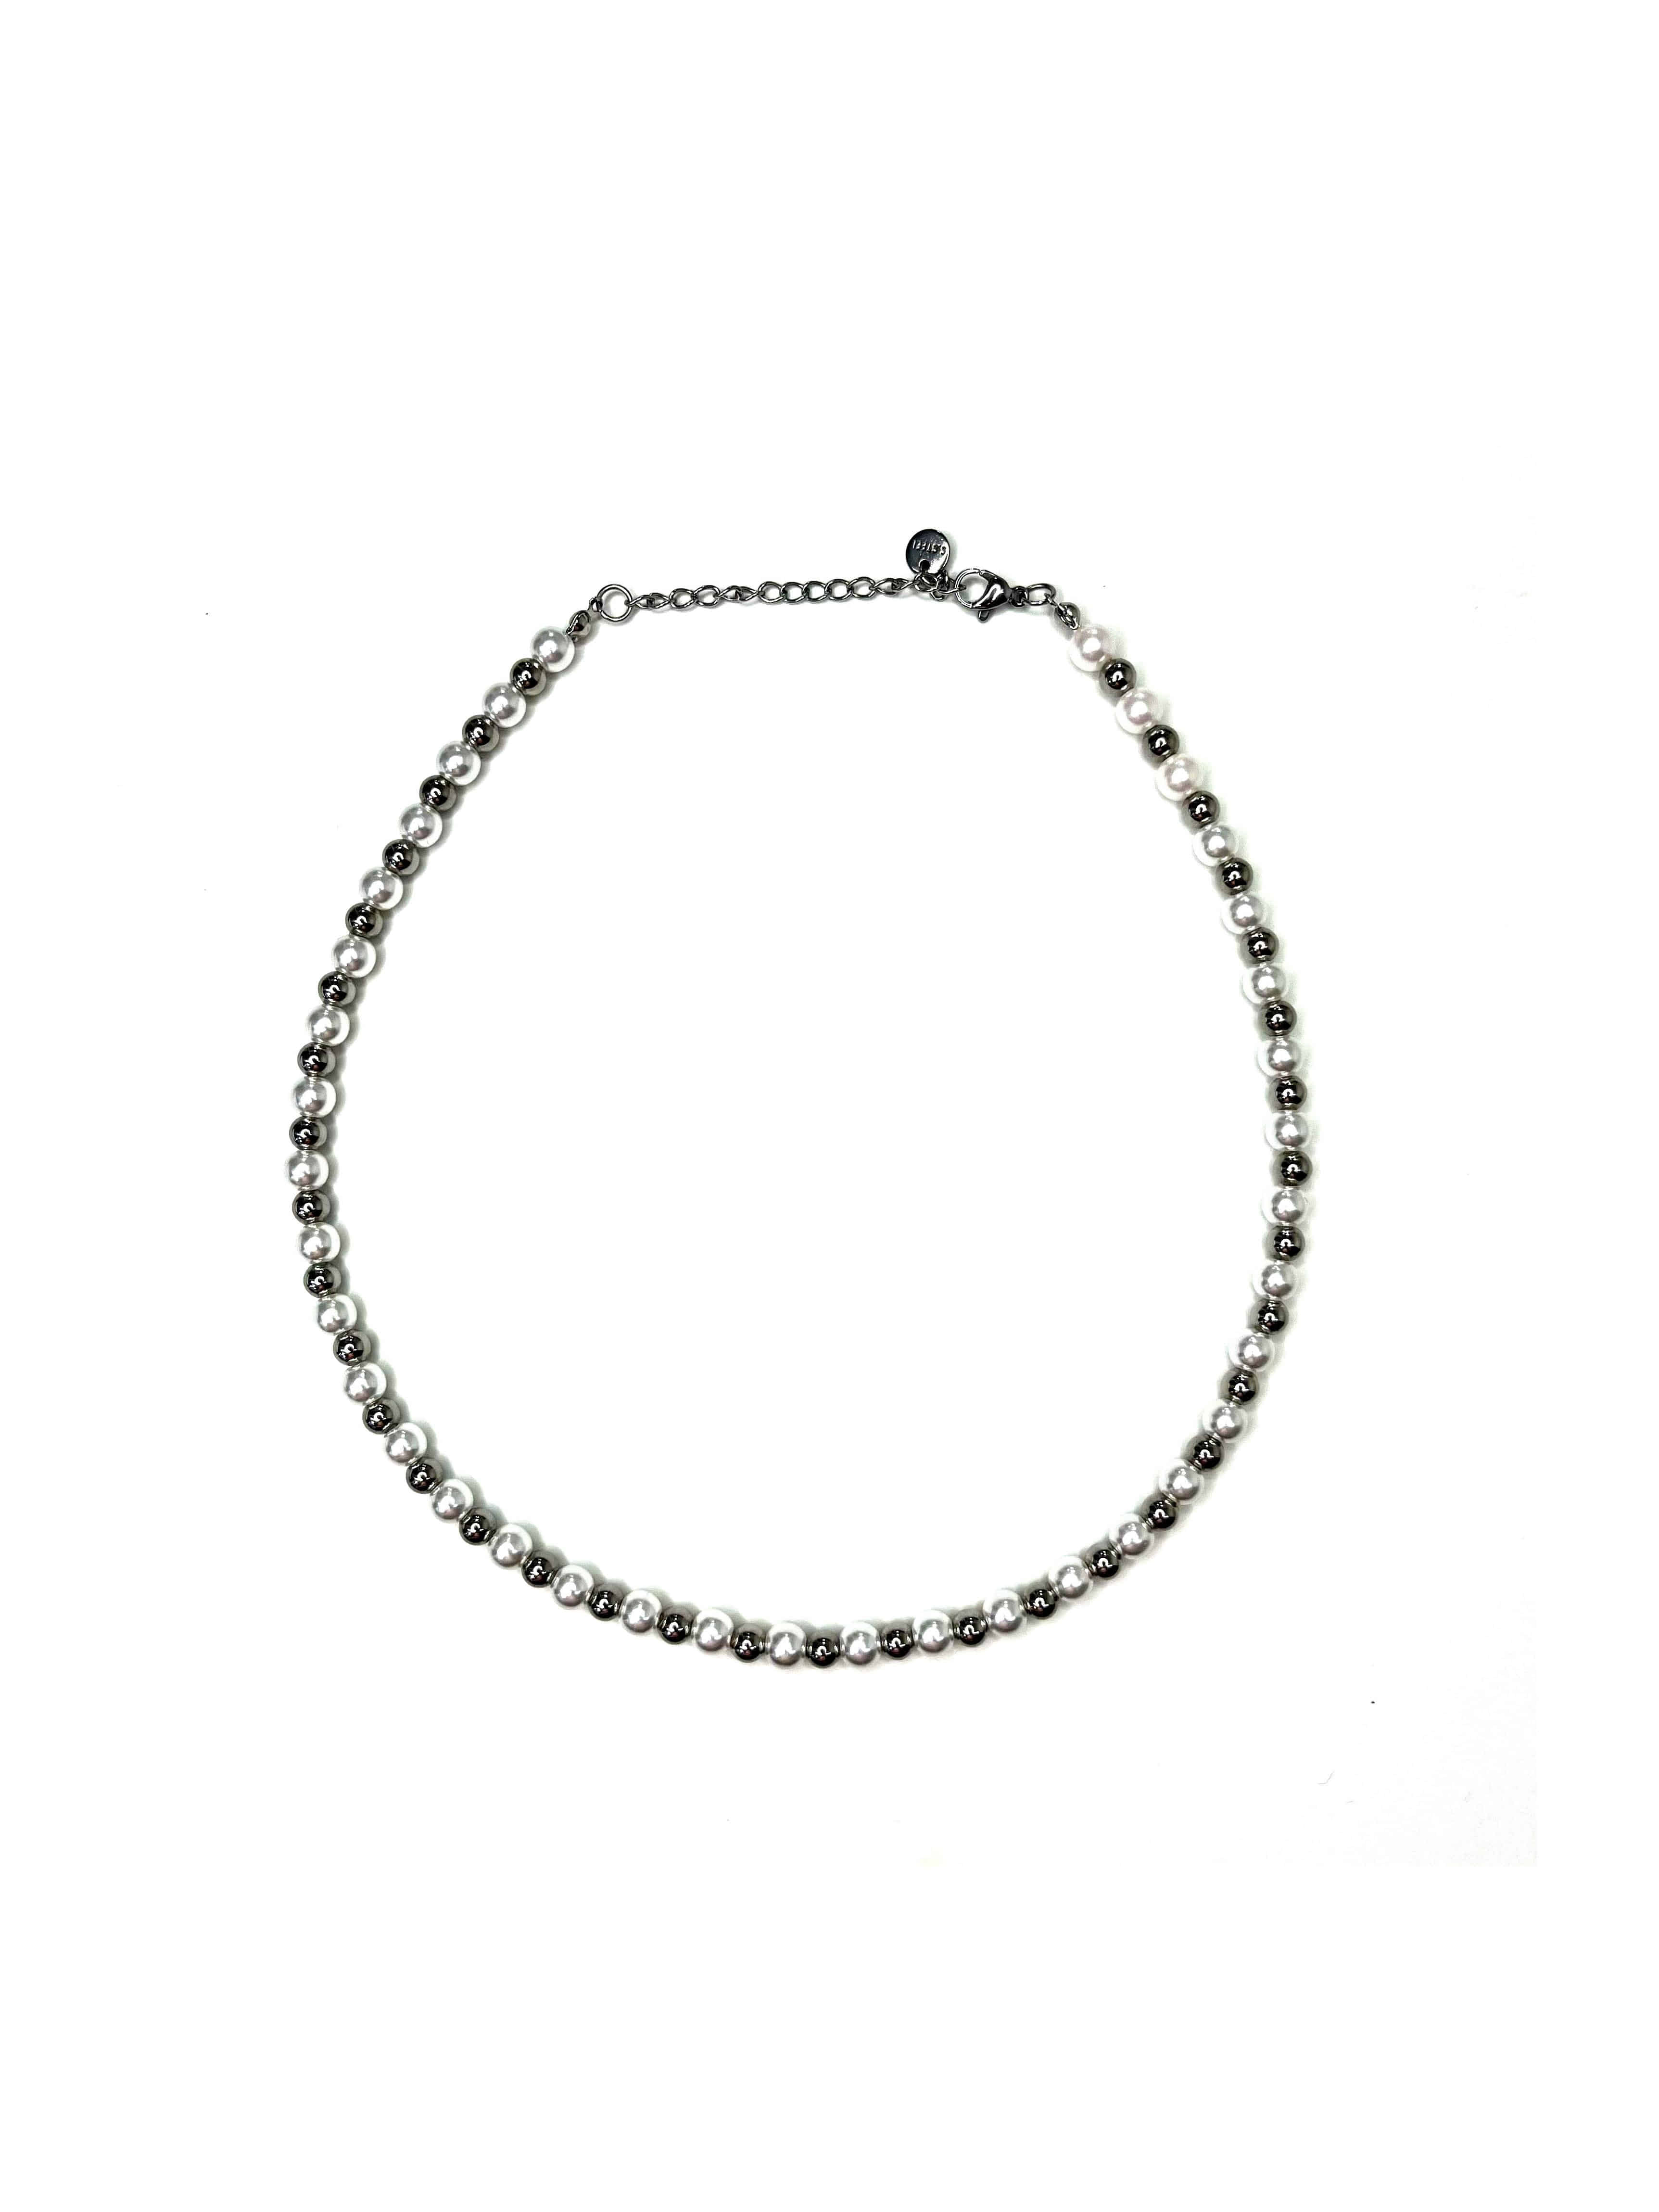 Shoi pearl necklace